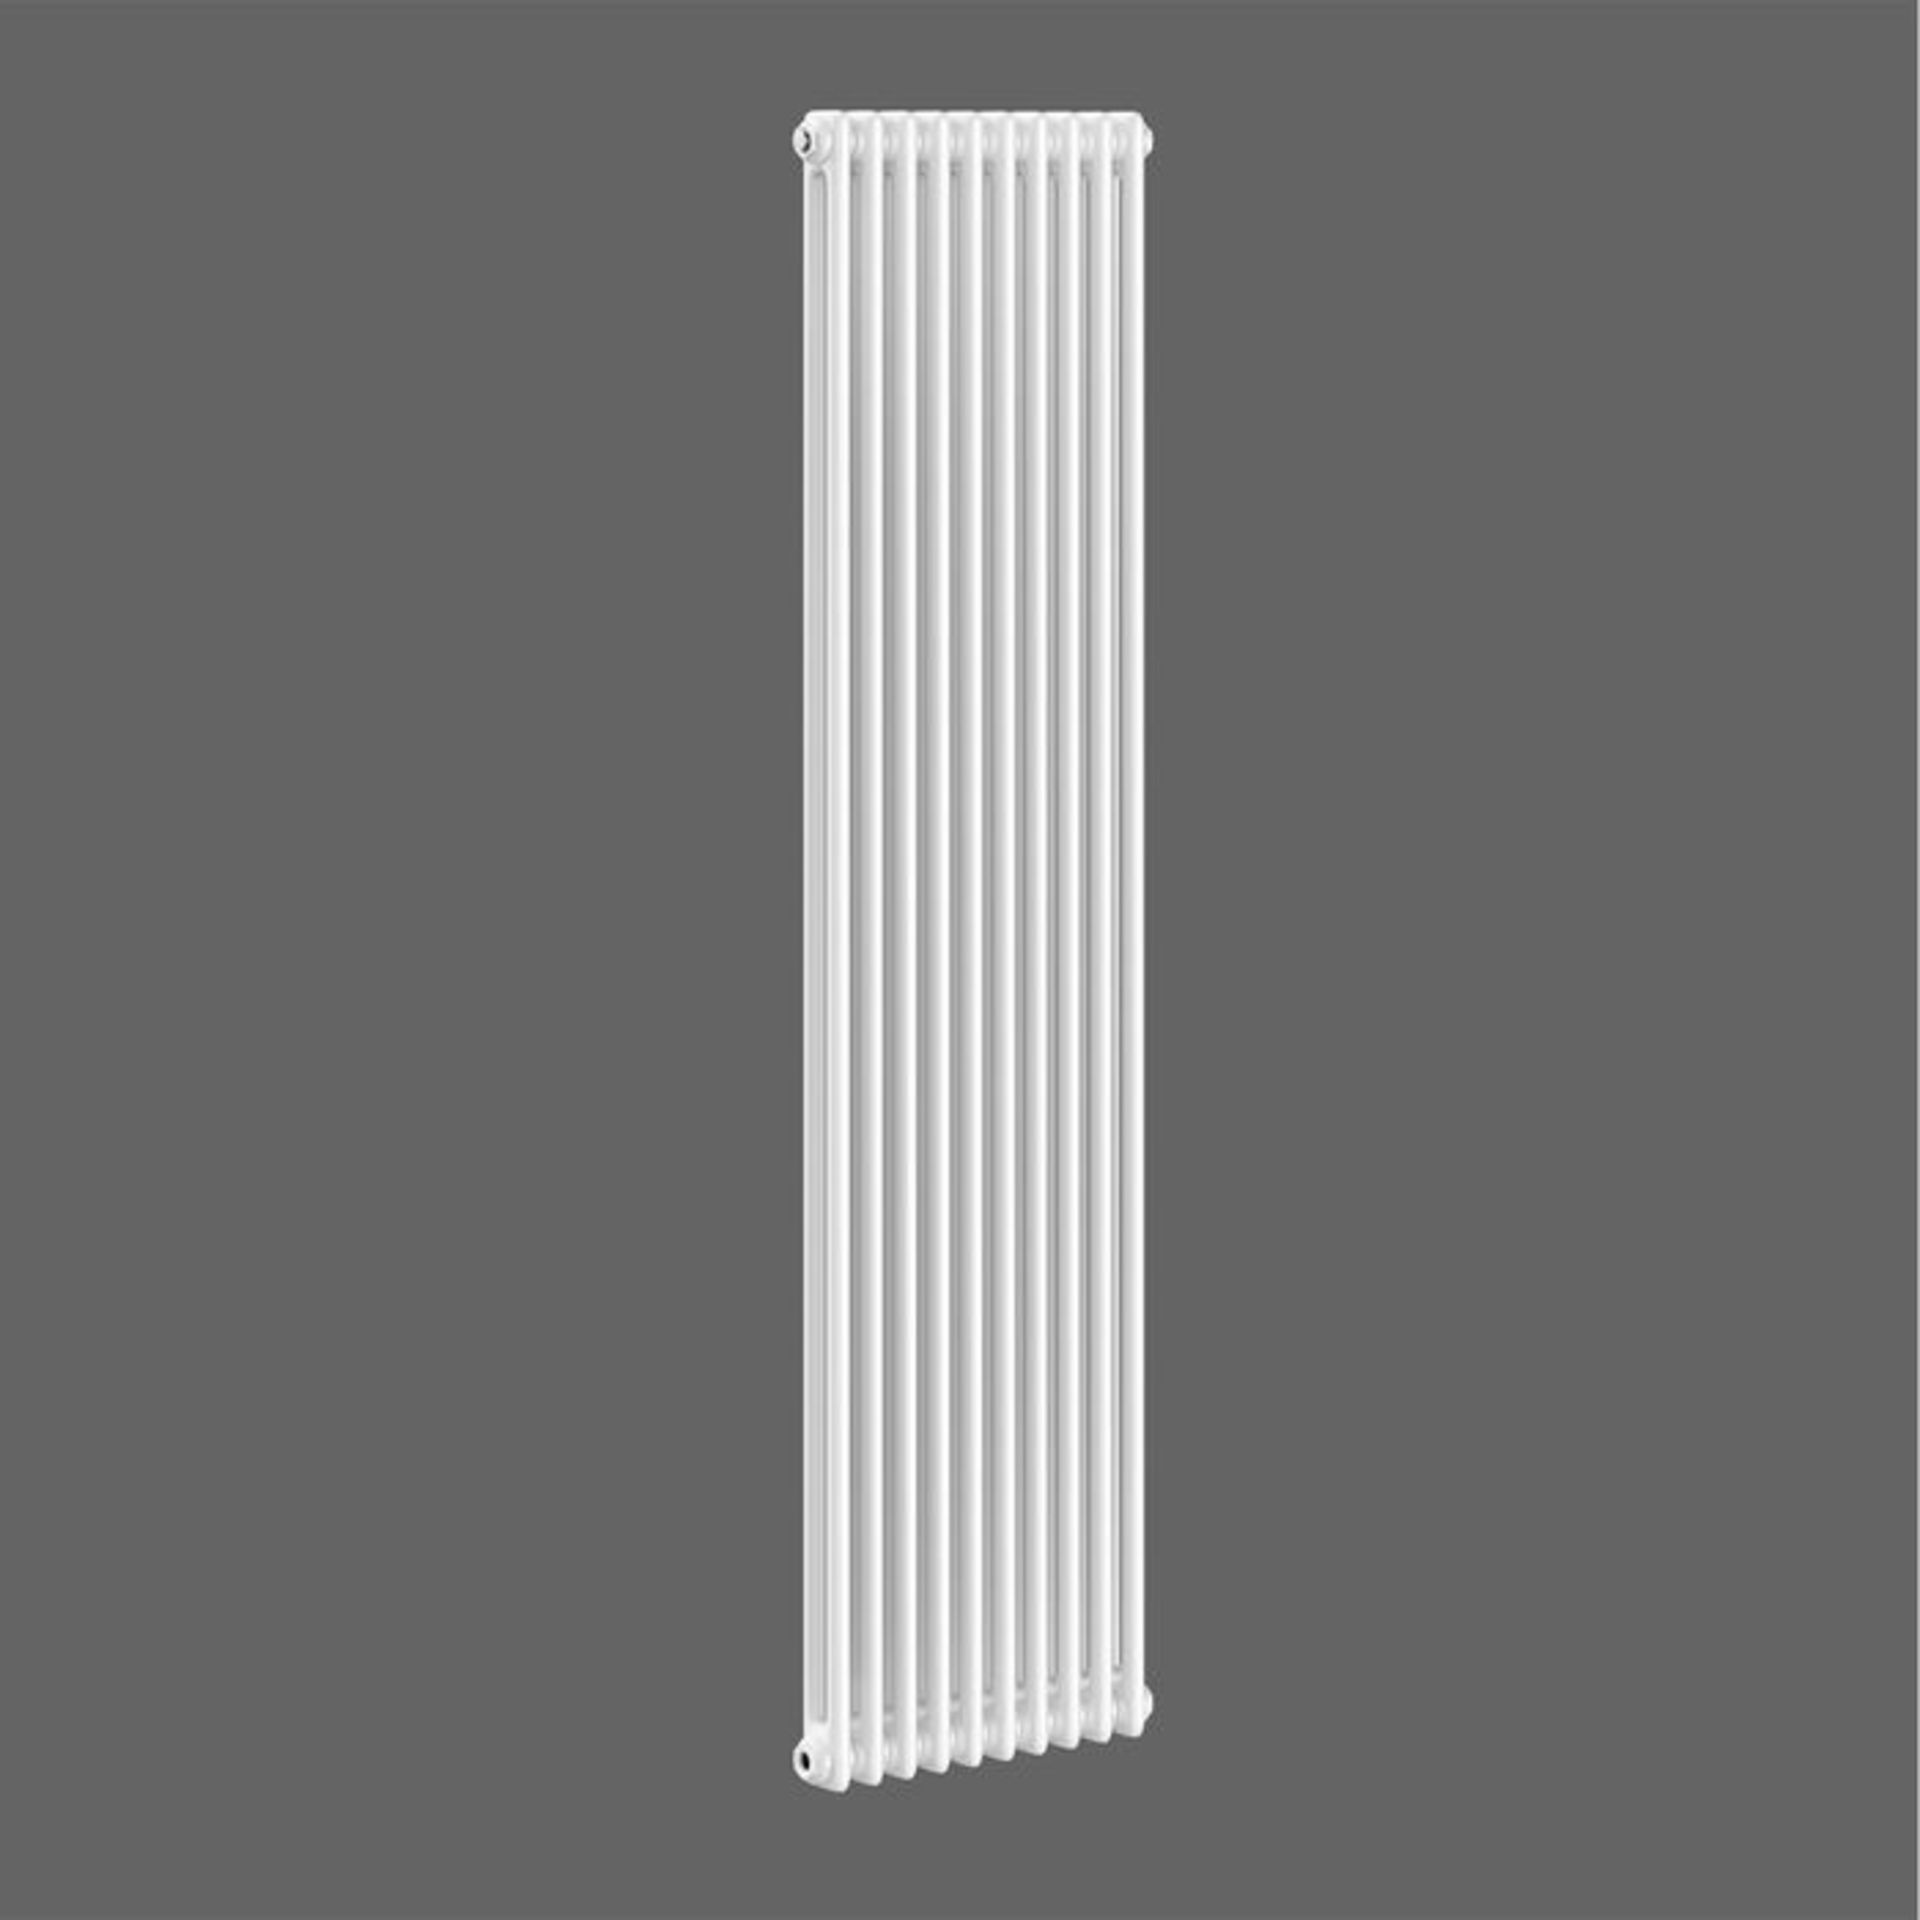 (QW71) 2000x490mm White Double Panel Vertical Colosseum Traditional Radiator. RRP £489.99. - Image 8 of 8